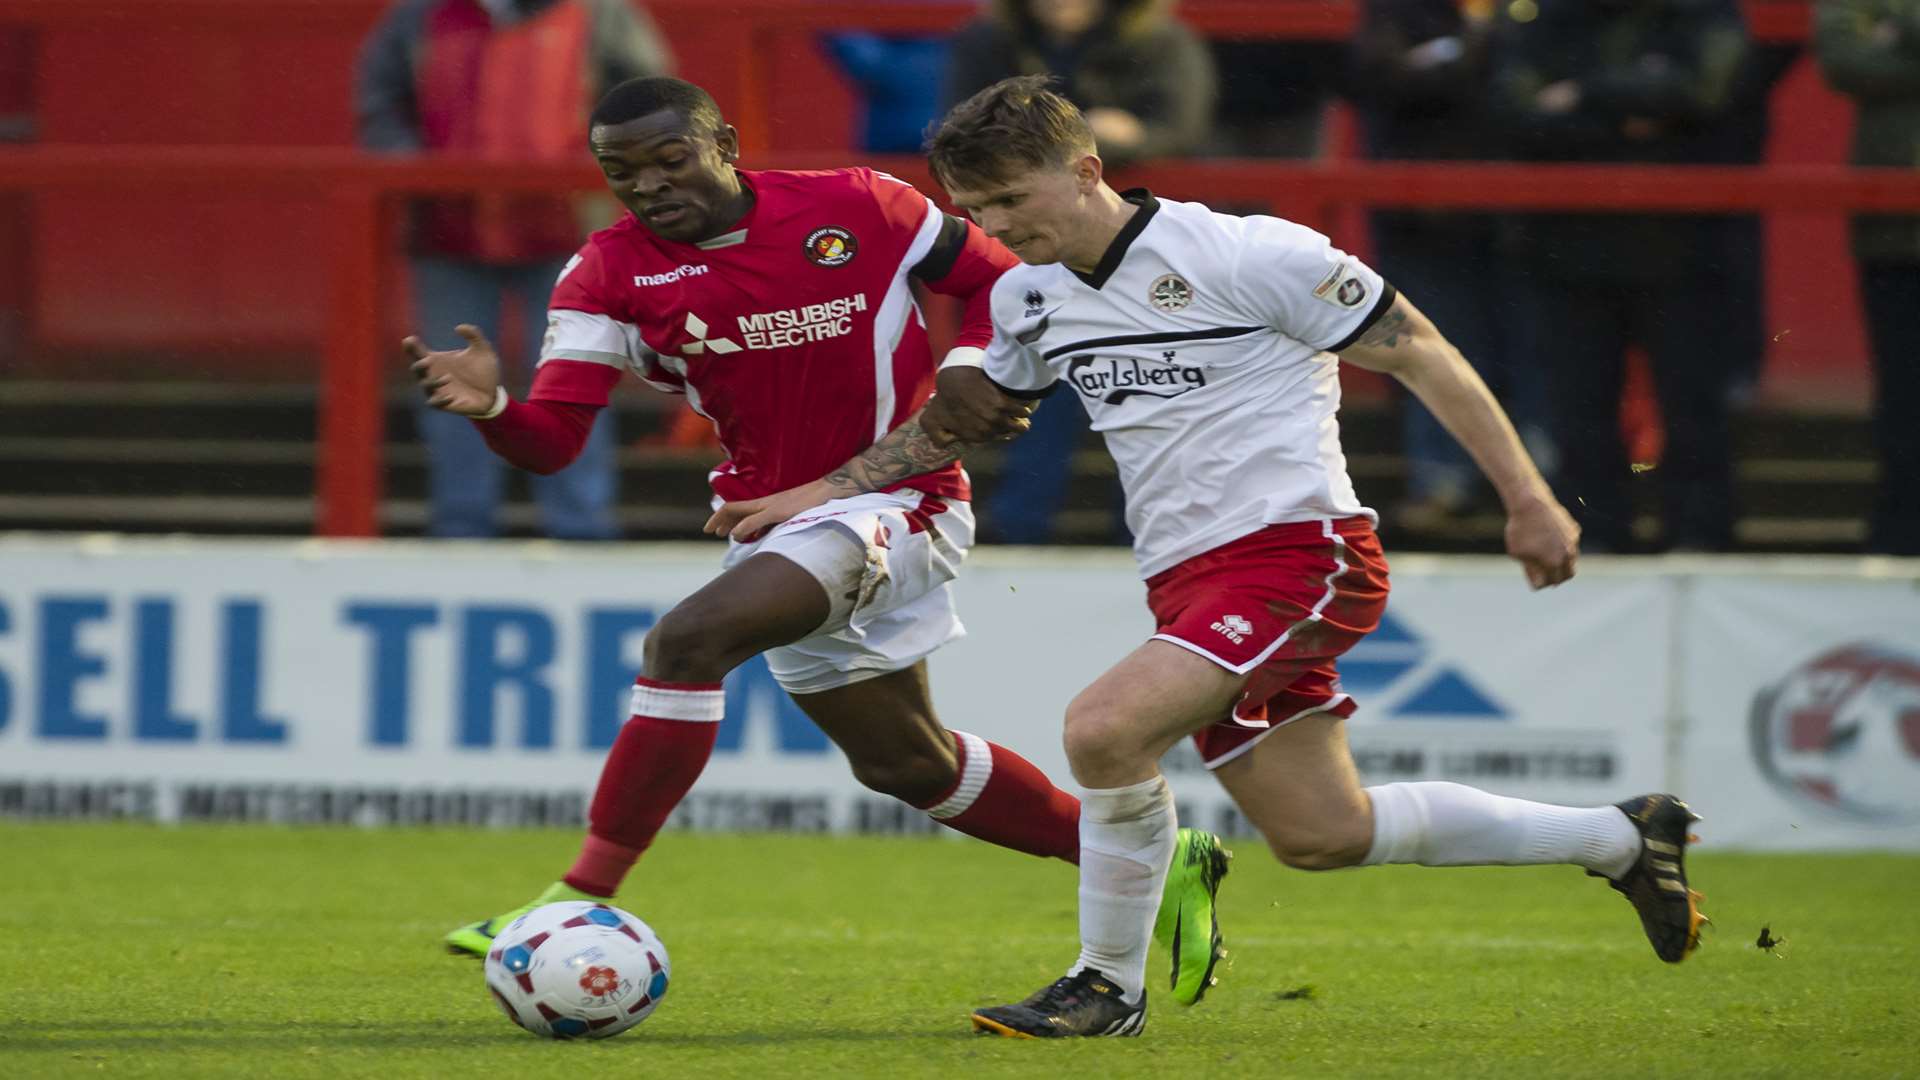 Anthony Cook went close to scoring for Ebbsfleet against Truro Picture: Andy Payton